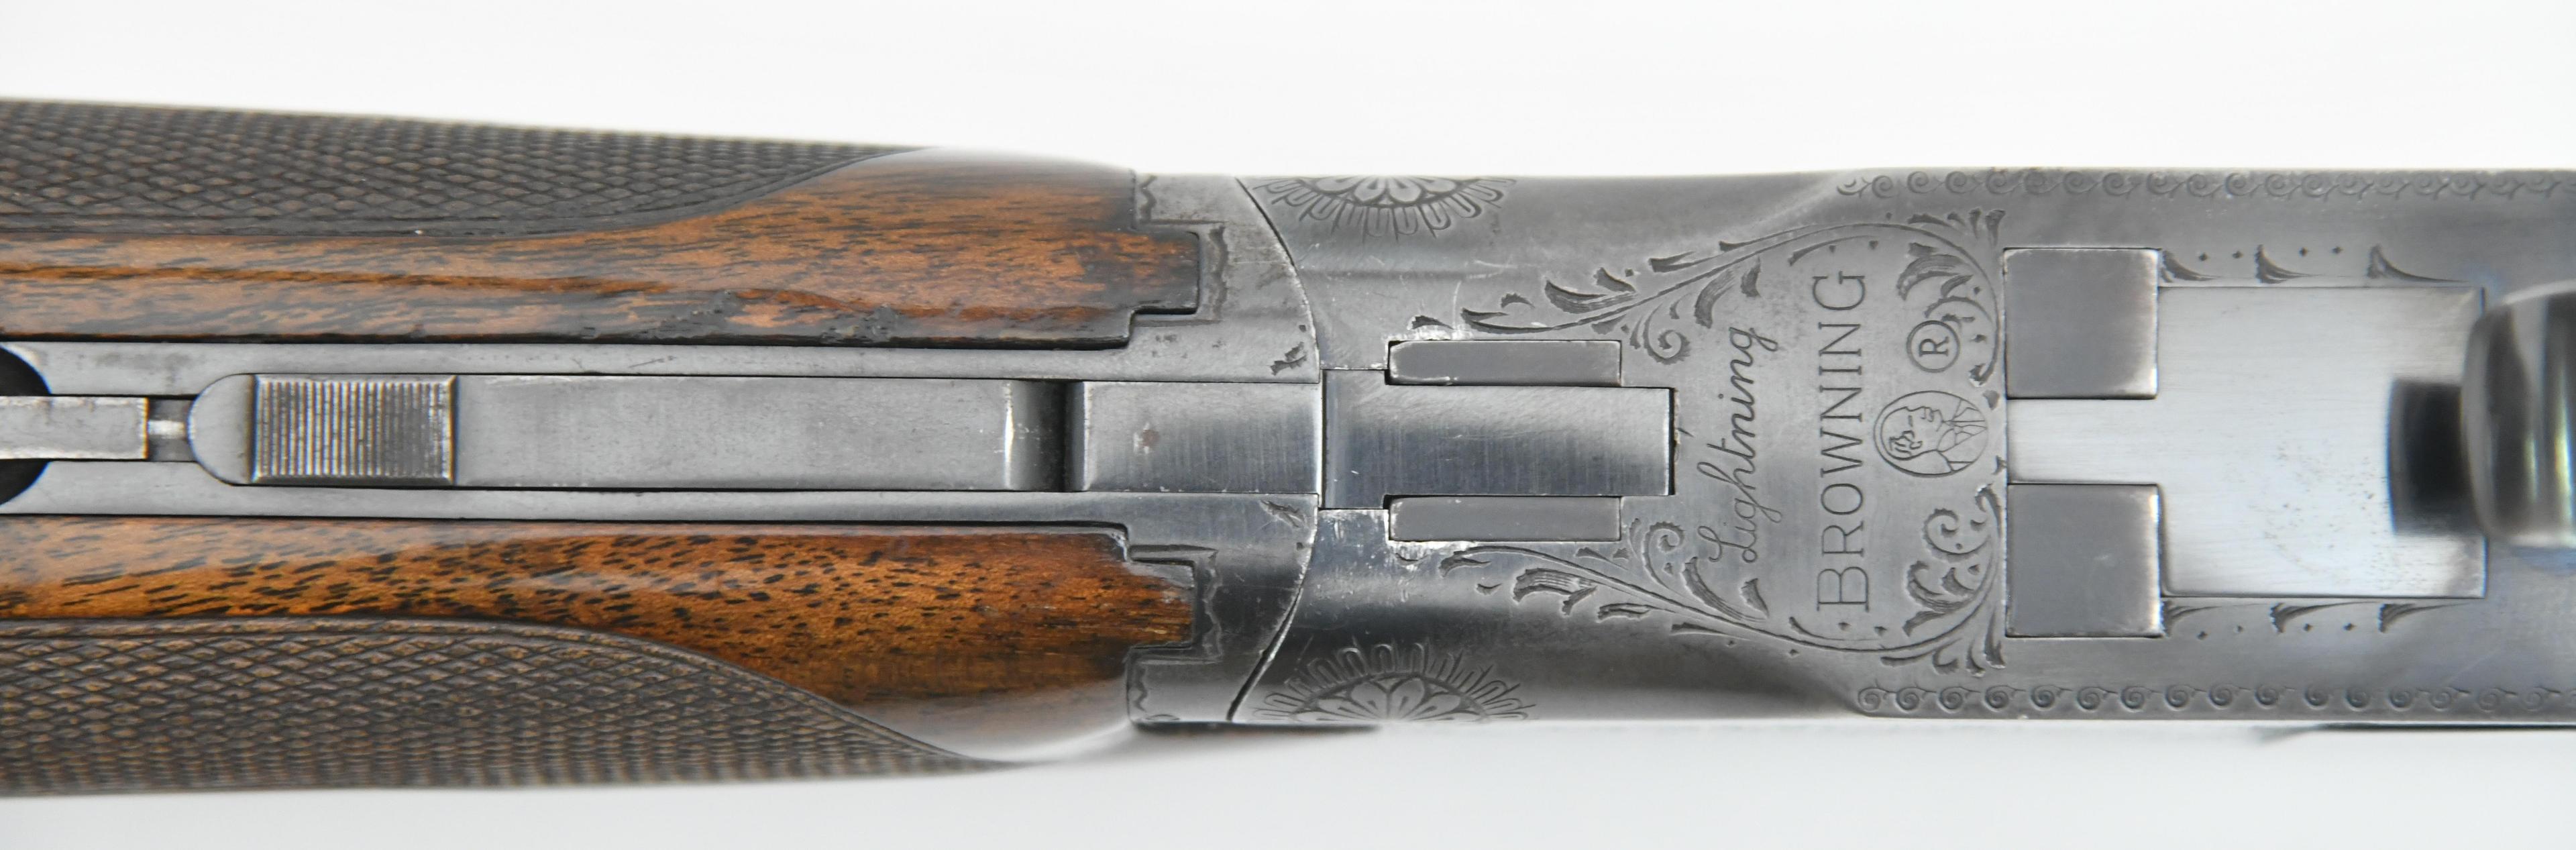 Browning Arms Co. Lightning Model